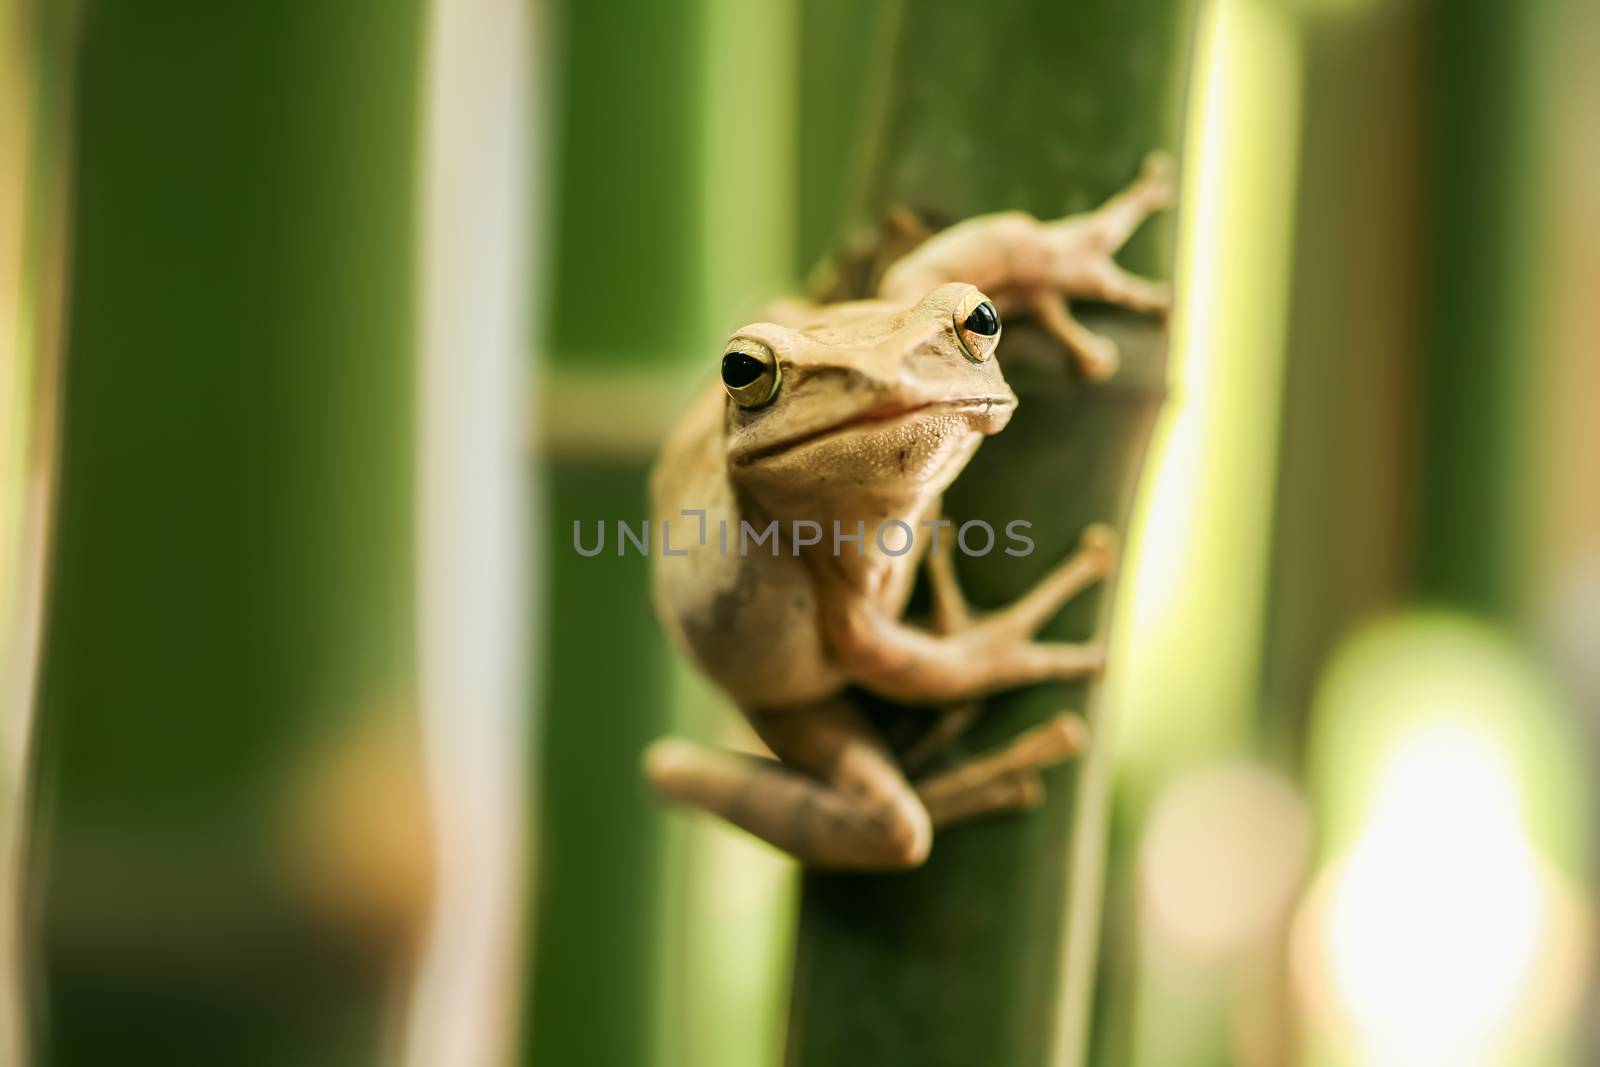 Tree frogs, two islands in the bamboo garden.